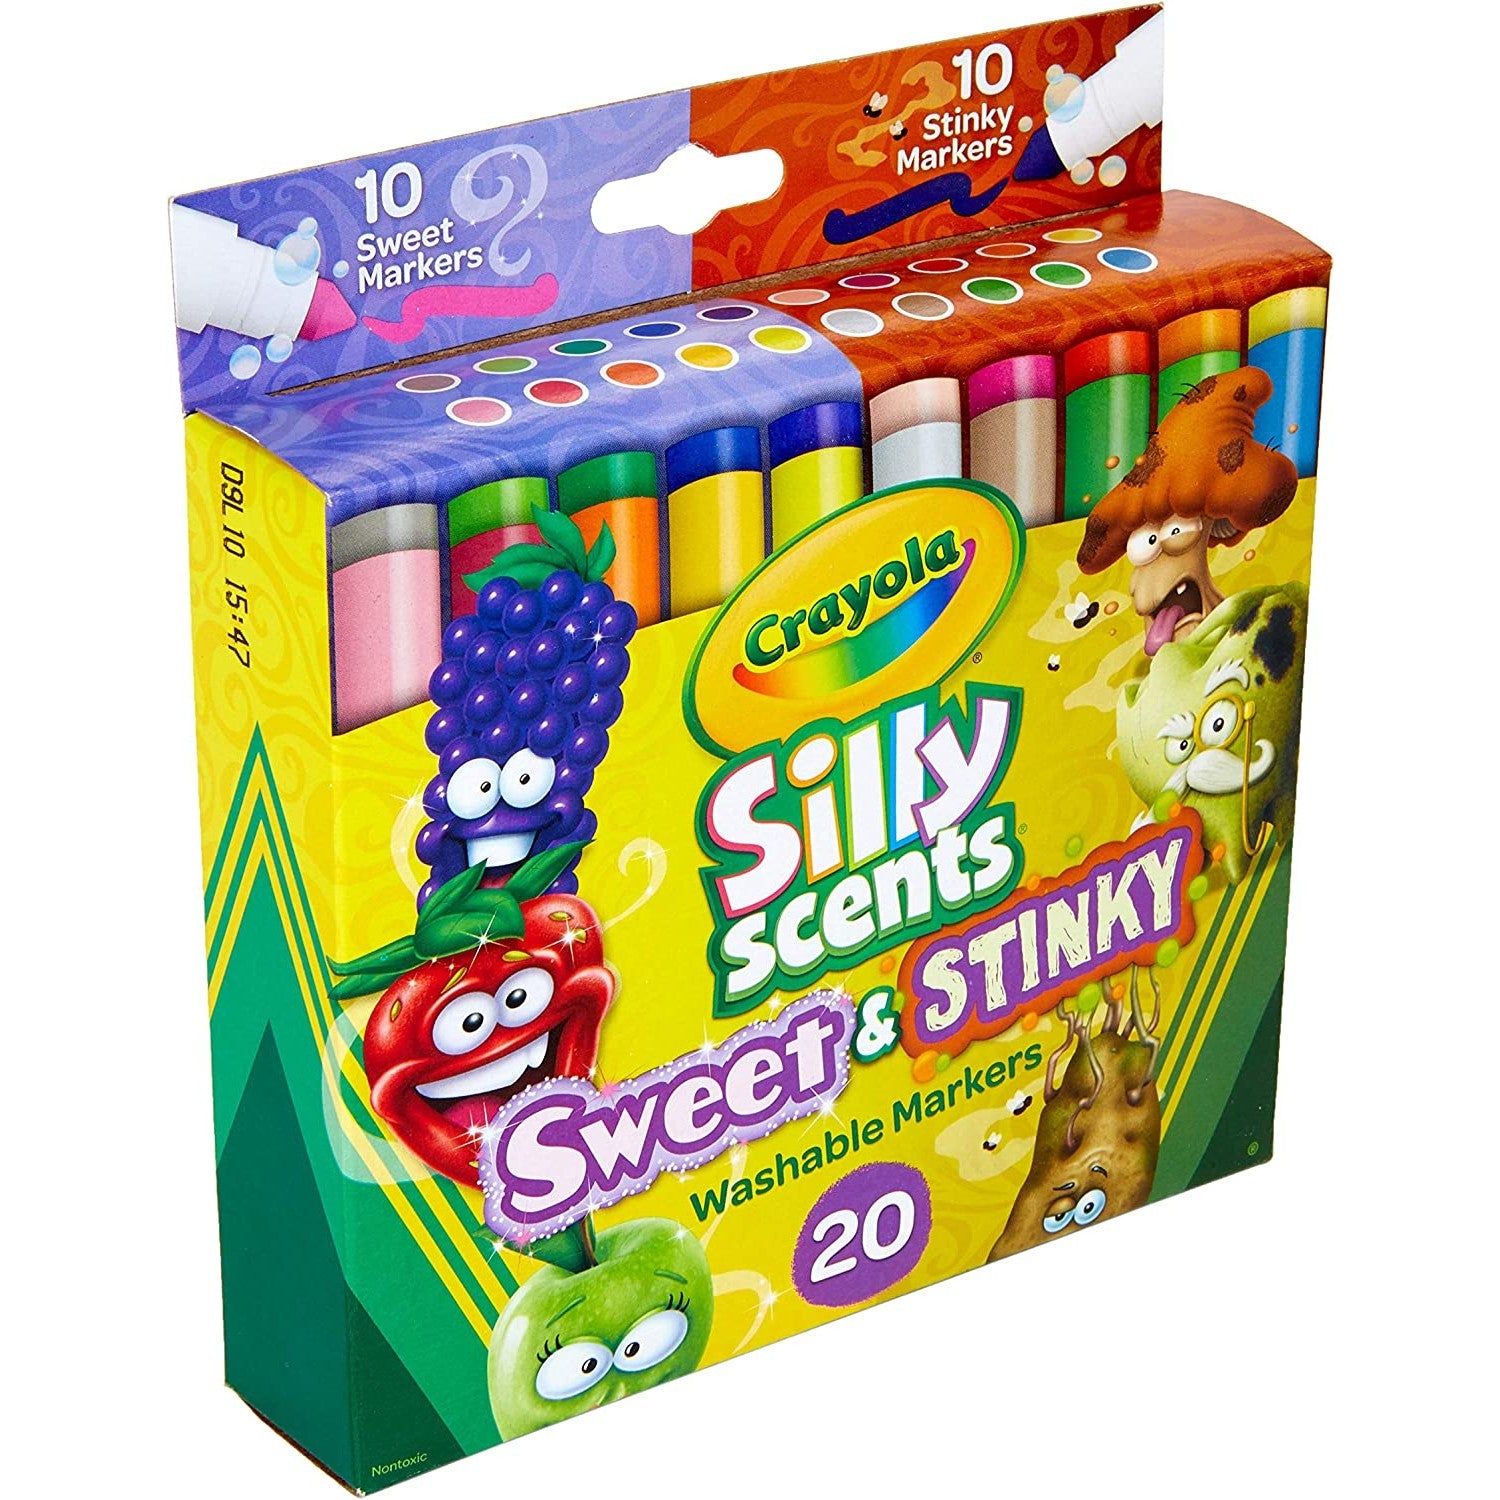 A box of Crayola silly scents sweet and stinky markers featuring pleasant and unpleasant smelly markers.